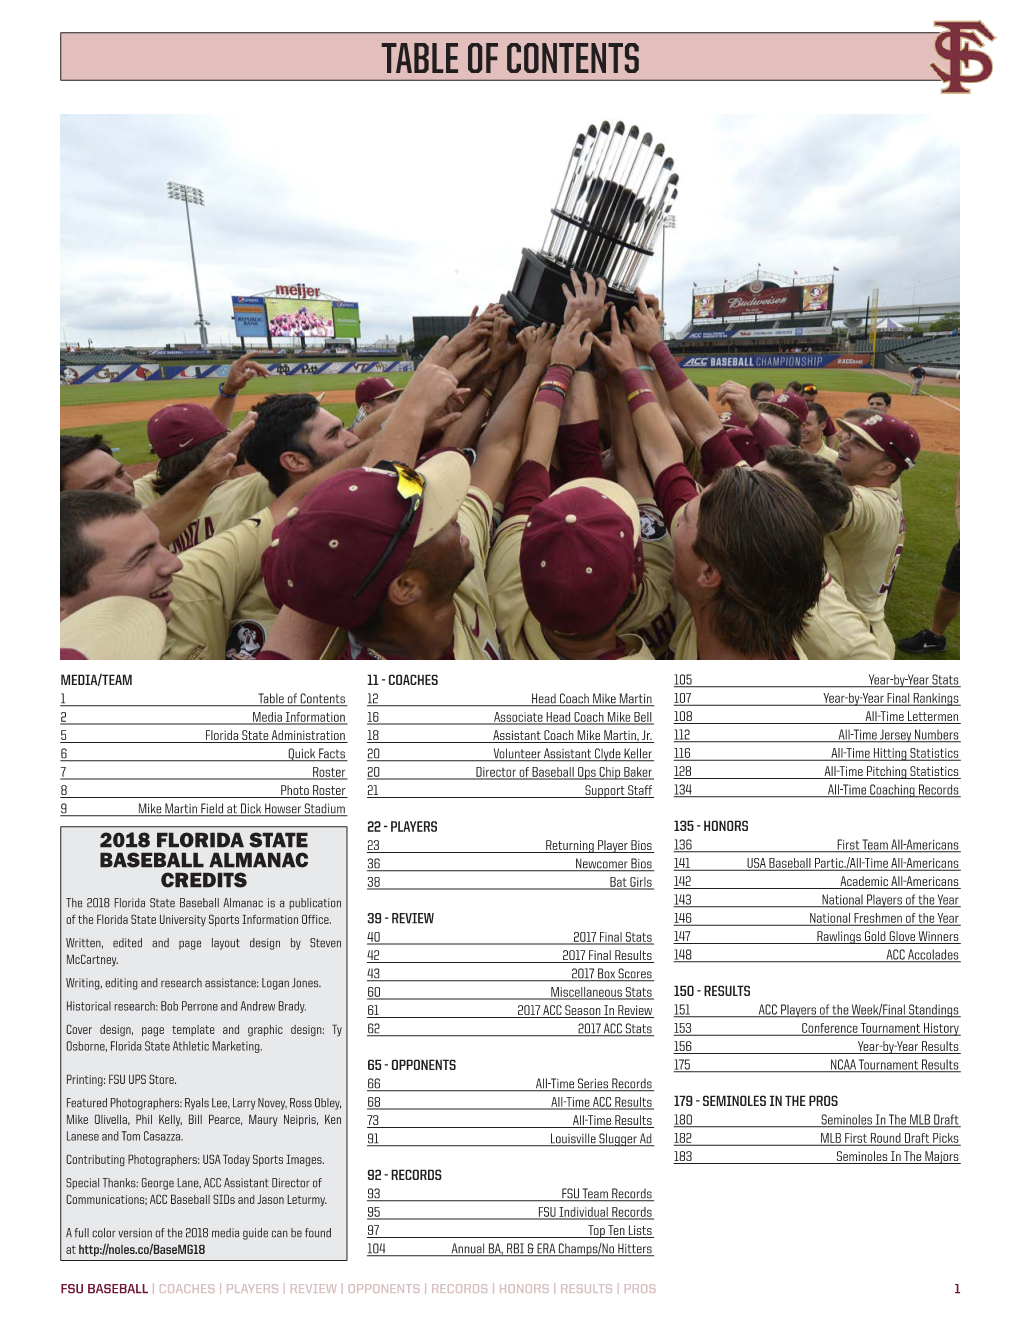 Fsu Baseball | Coaches | Players | Review | Opponents | Records | Honors | Results | Pros 1 Media Information